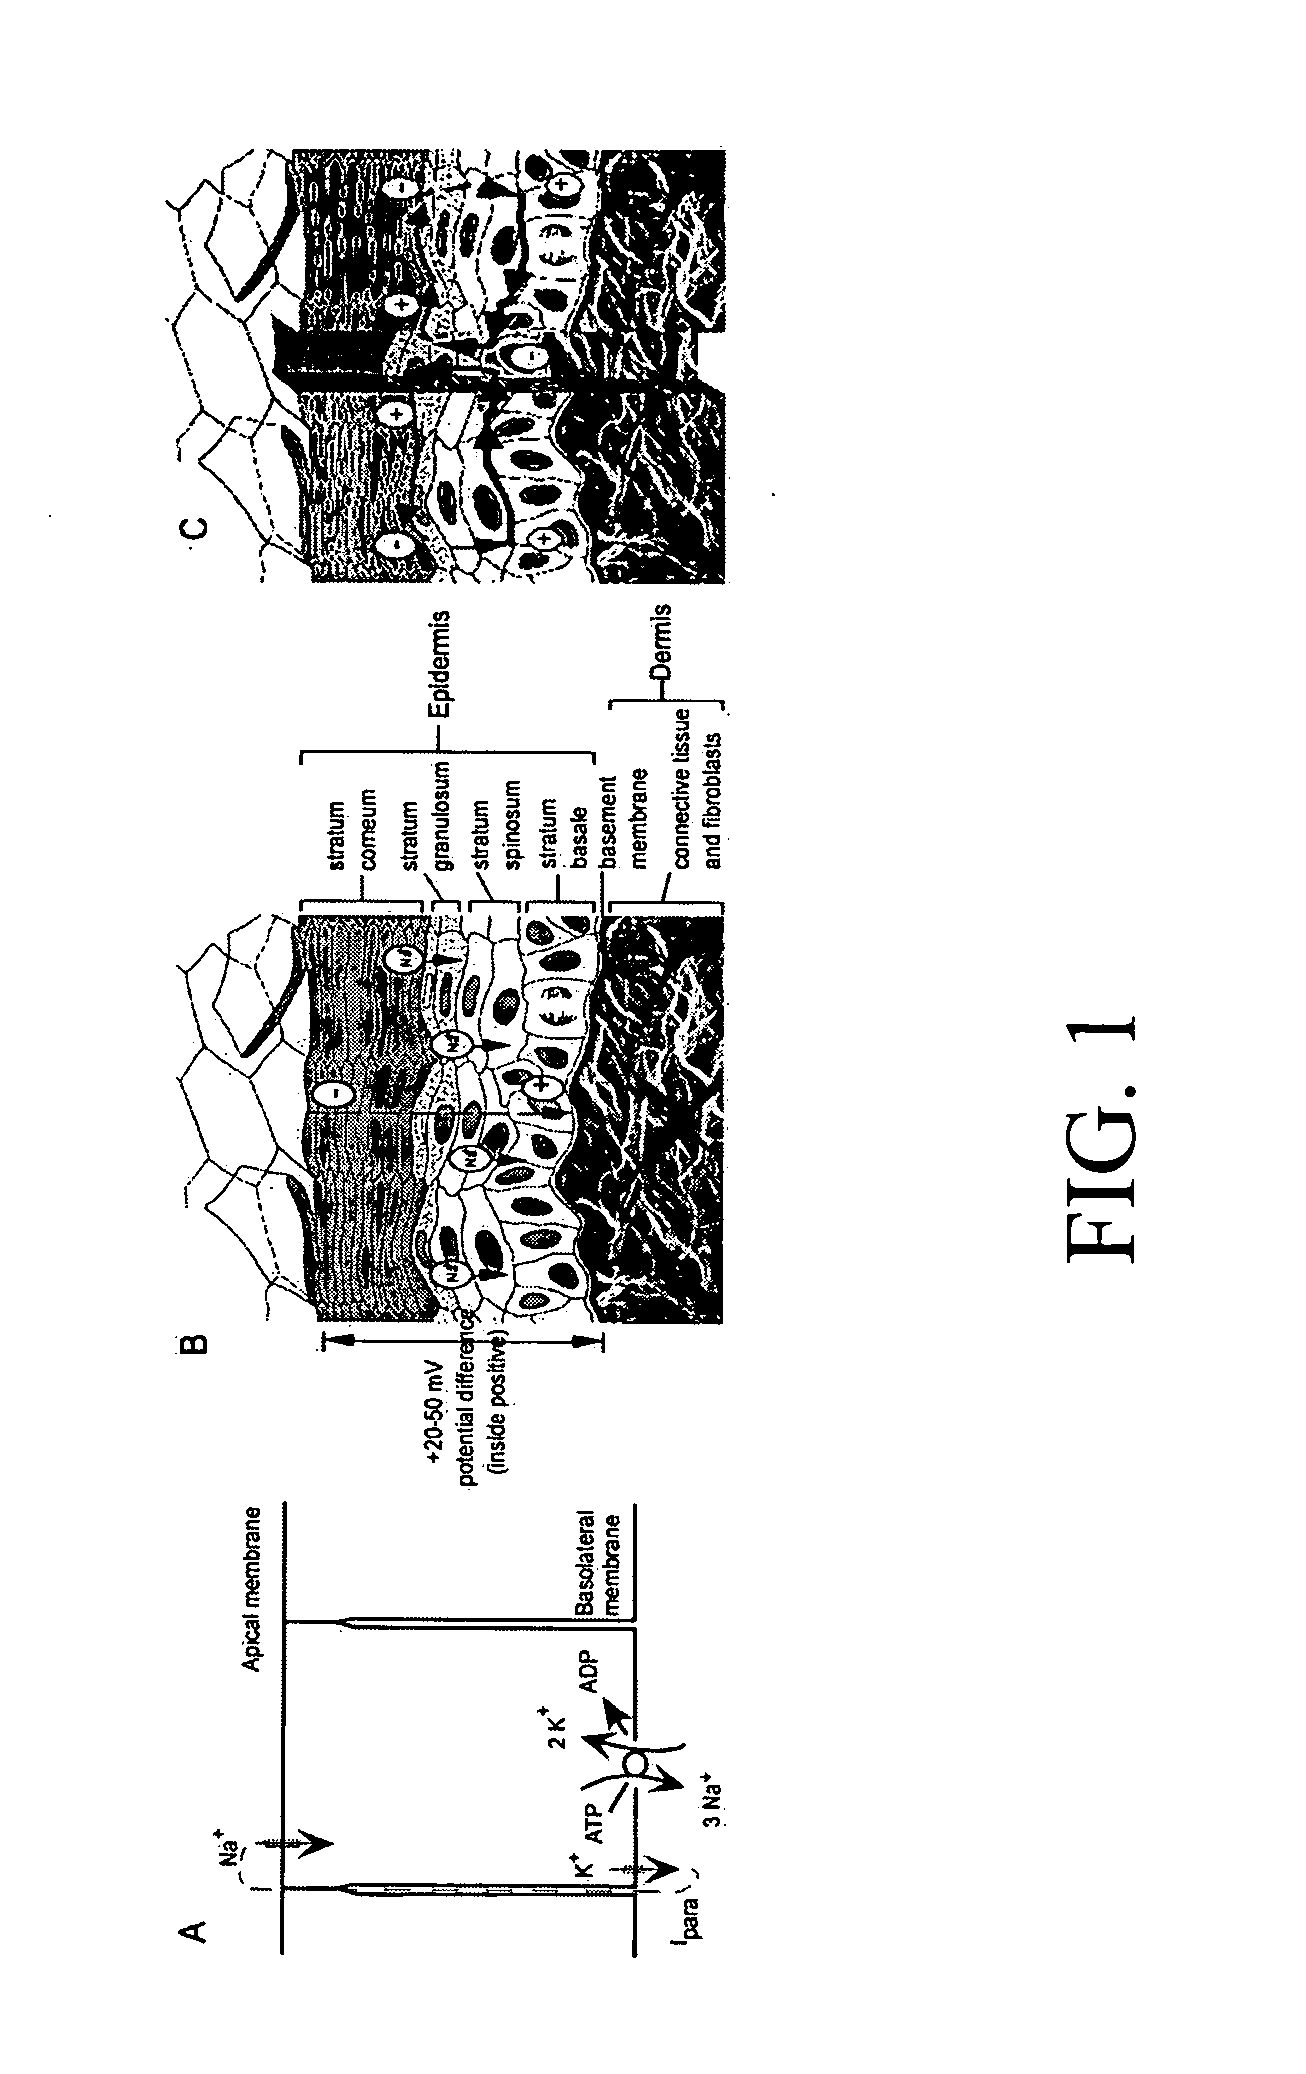 Application of the kelvin probe technique to mammalian skin and other epithelial structures